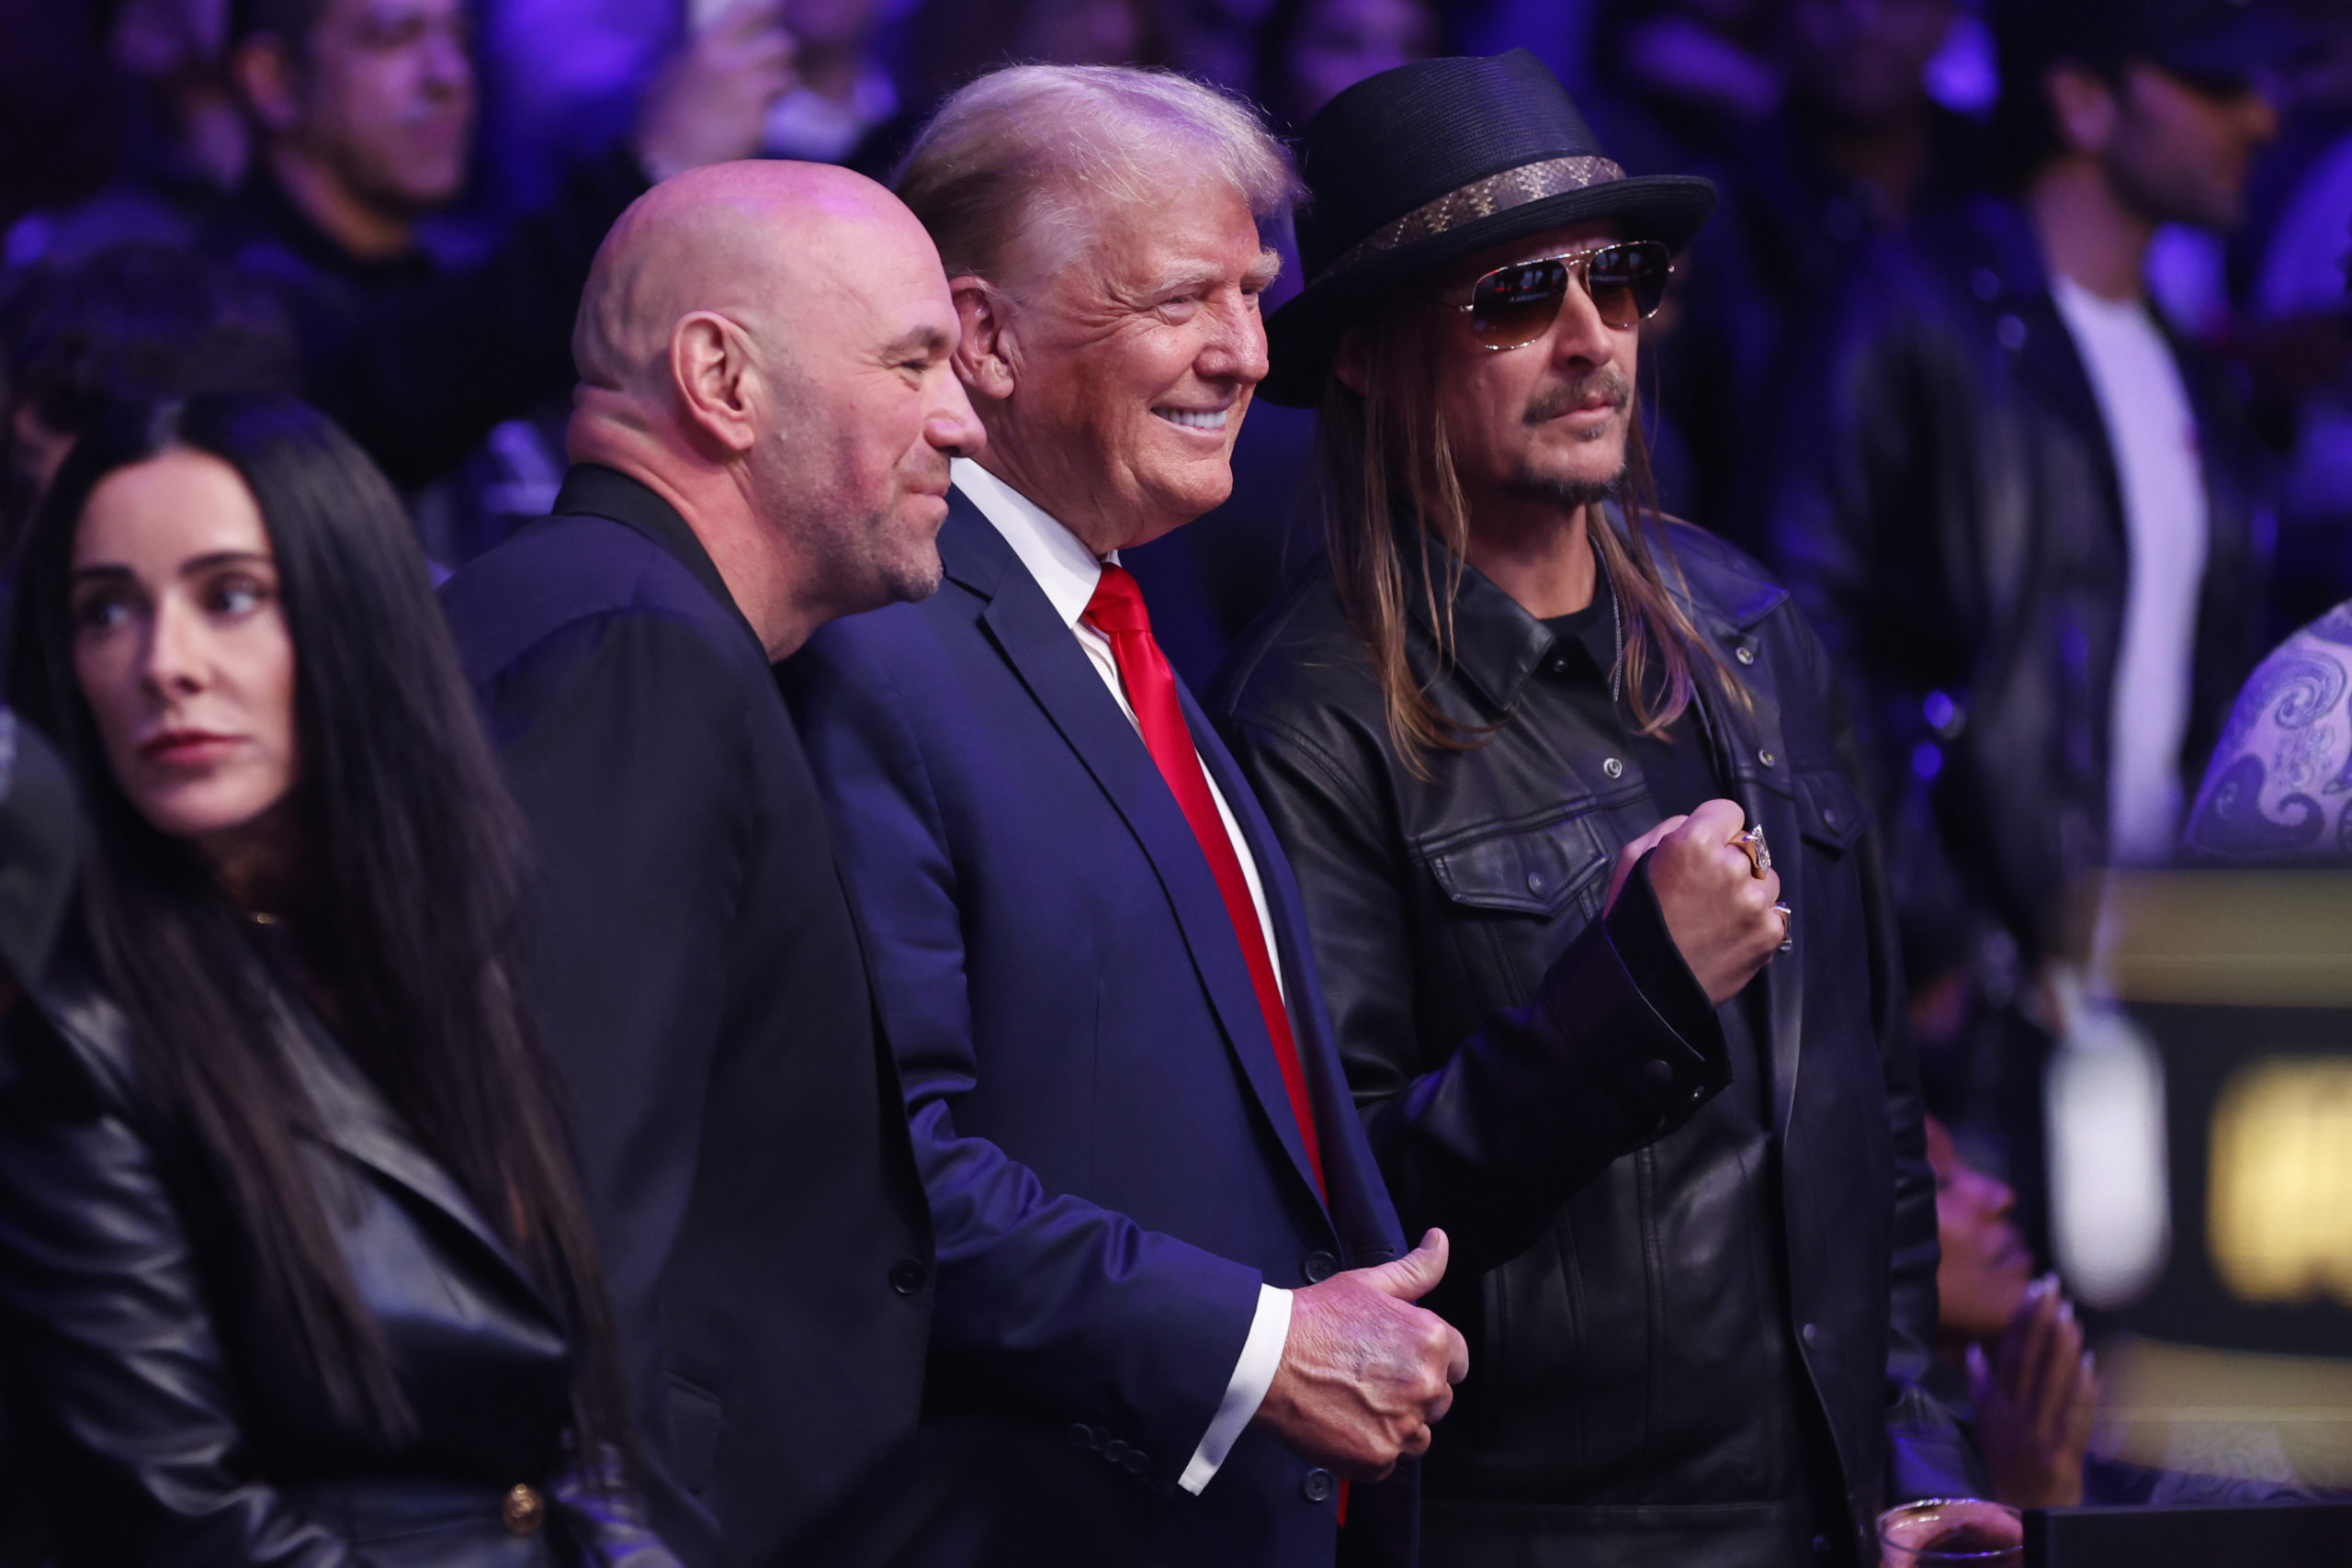 NEW YORK, NEW YORK - NOVEMBER 11: Former U.S. President Donald Trump, UFC president Dana White, and Kid Rock pose fora photo during the UFC 295 event at Madison Square Garden on November 11, 2023 in New York City. Sarah Stier/Getty Images